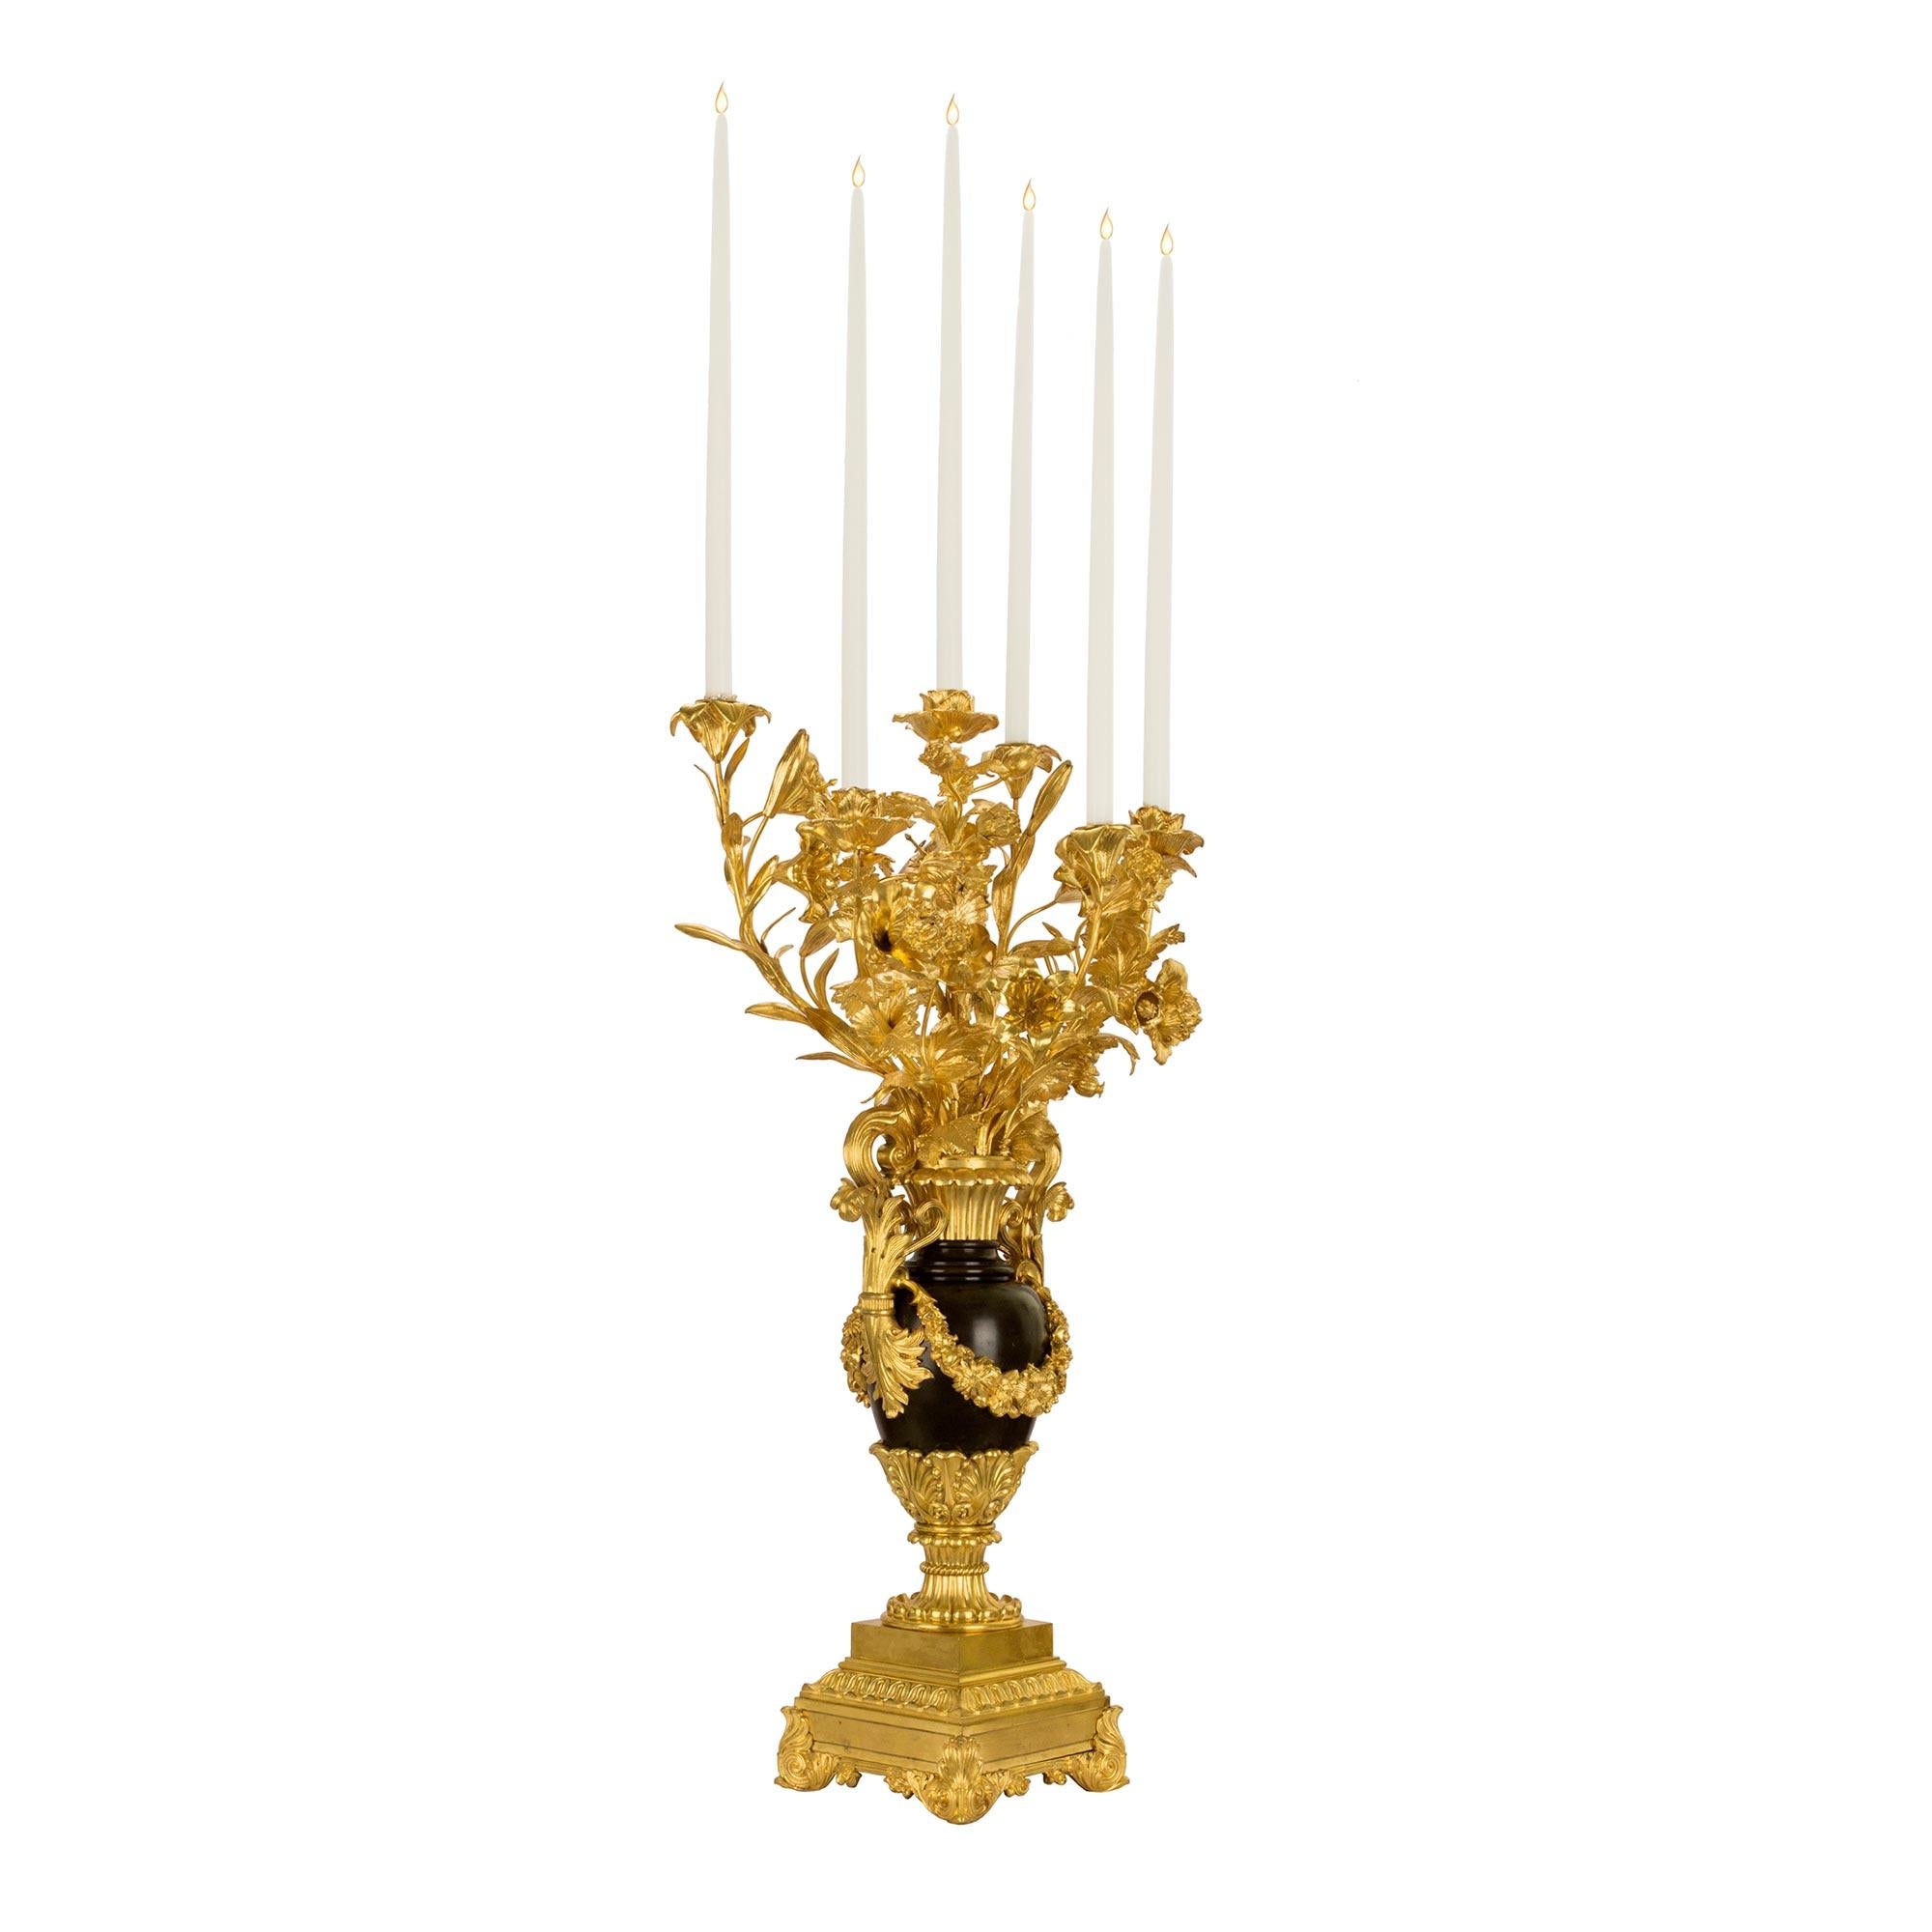 A spectacular and monumental scaled pair of French mid 19th century Louis Philippe six arm candelabras in ormolu and patinated vertigris bronze. The pair are raised by an impressive square base above four scrolled acanthus leaf supports. The reeded